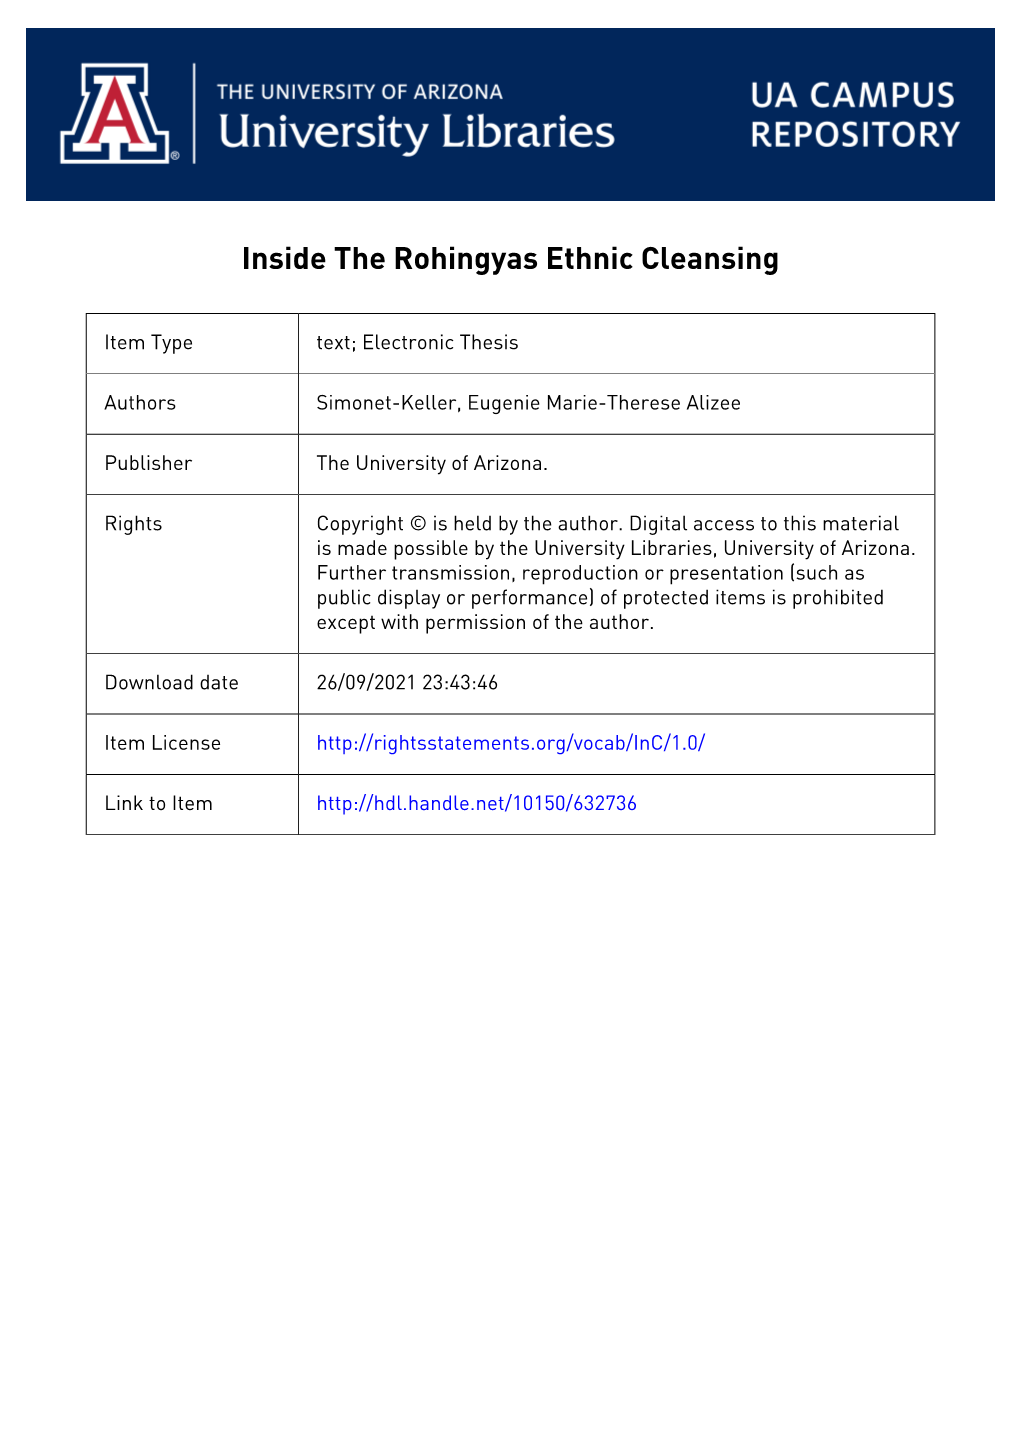 INSIDE the ROHINGYAS ETHNIC CLEANSING by EUGENIE MARIE-THERESE ALIZEE SIMONET-KELLER a Thesis Submitted T